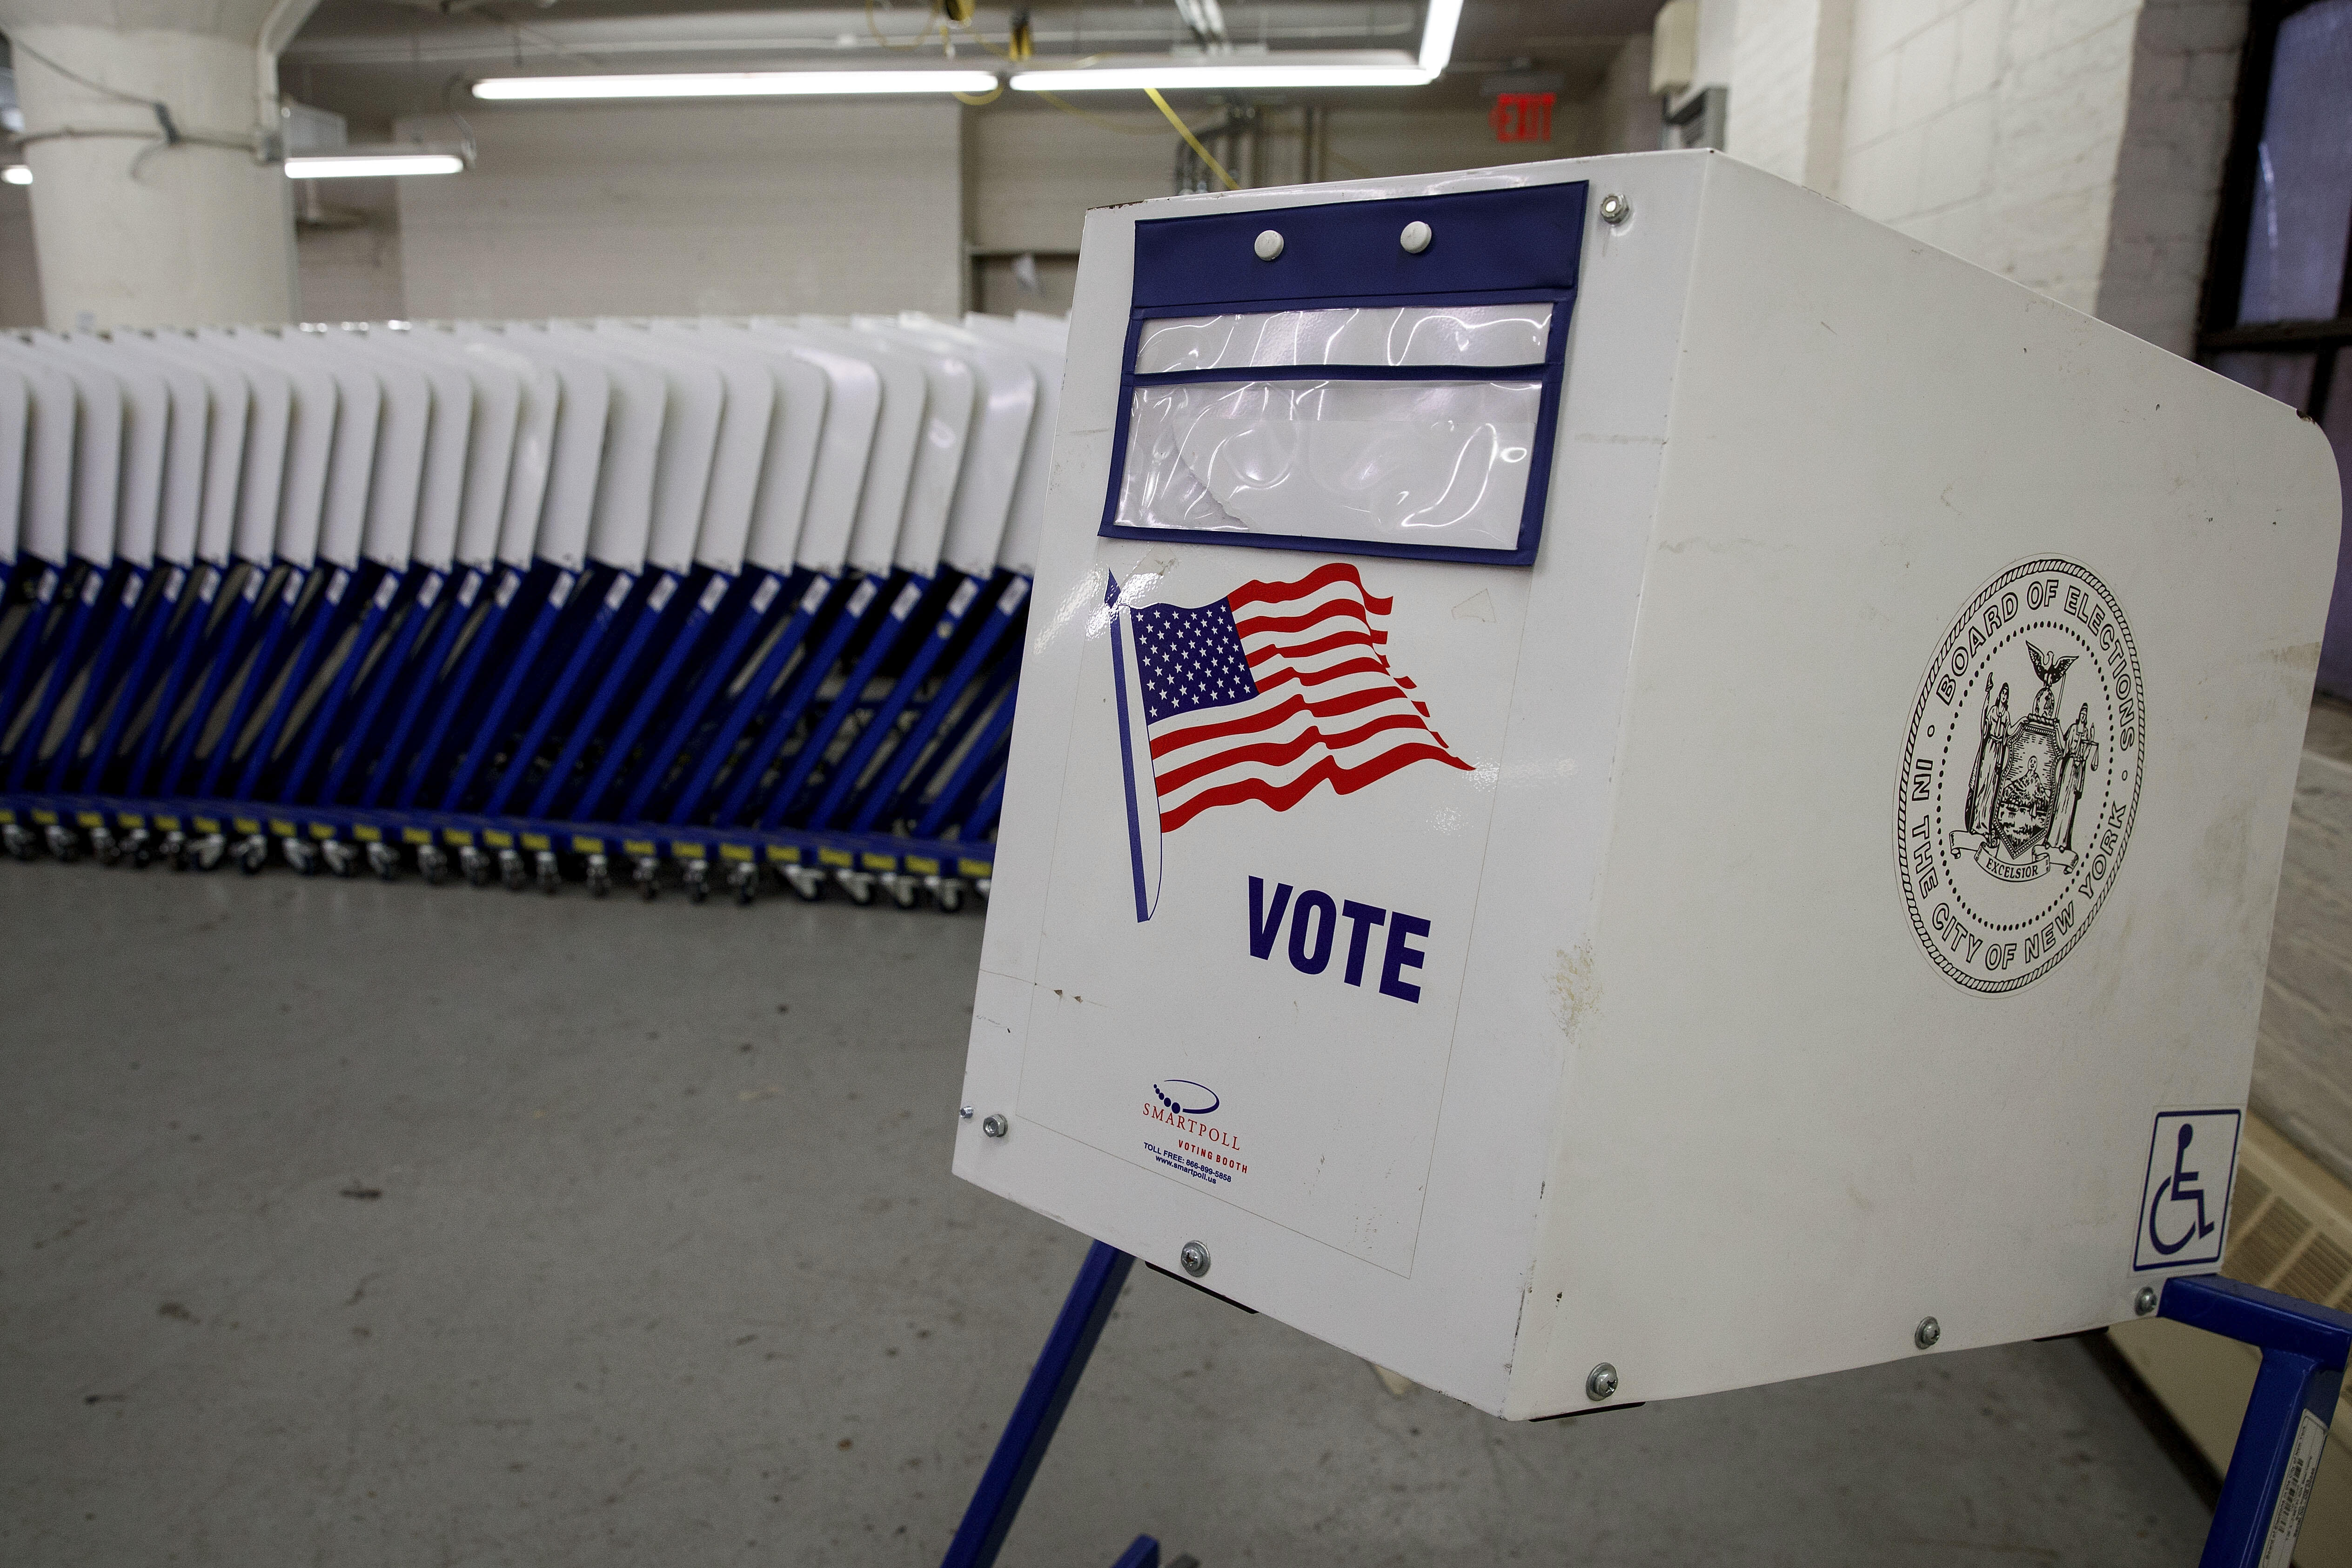 NEW YORK, NY - NOVEMBER 3:  Voting booths sit at a New York City Board of Elections voting machine facility warehouse, November 3, 2016 in the Bronx borough in New York City. The voting booths, ballot scanners and other supplies will be picked up on Monday and delivered to area Bronx polling places ahead of Tuesday's election. (Photo by Drew Angerer/Getty Images)